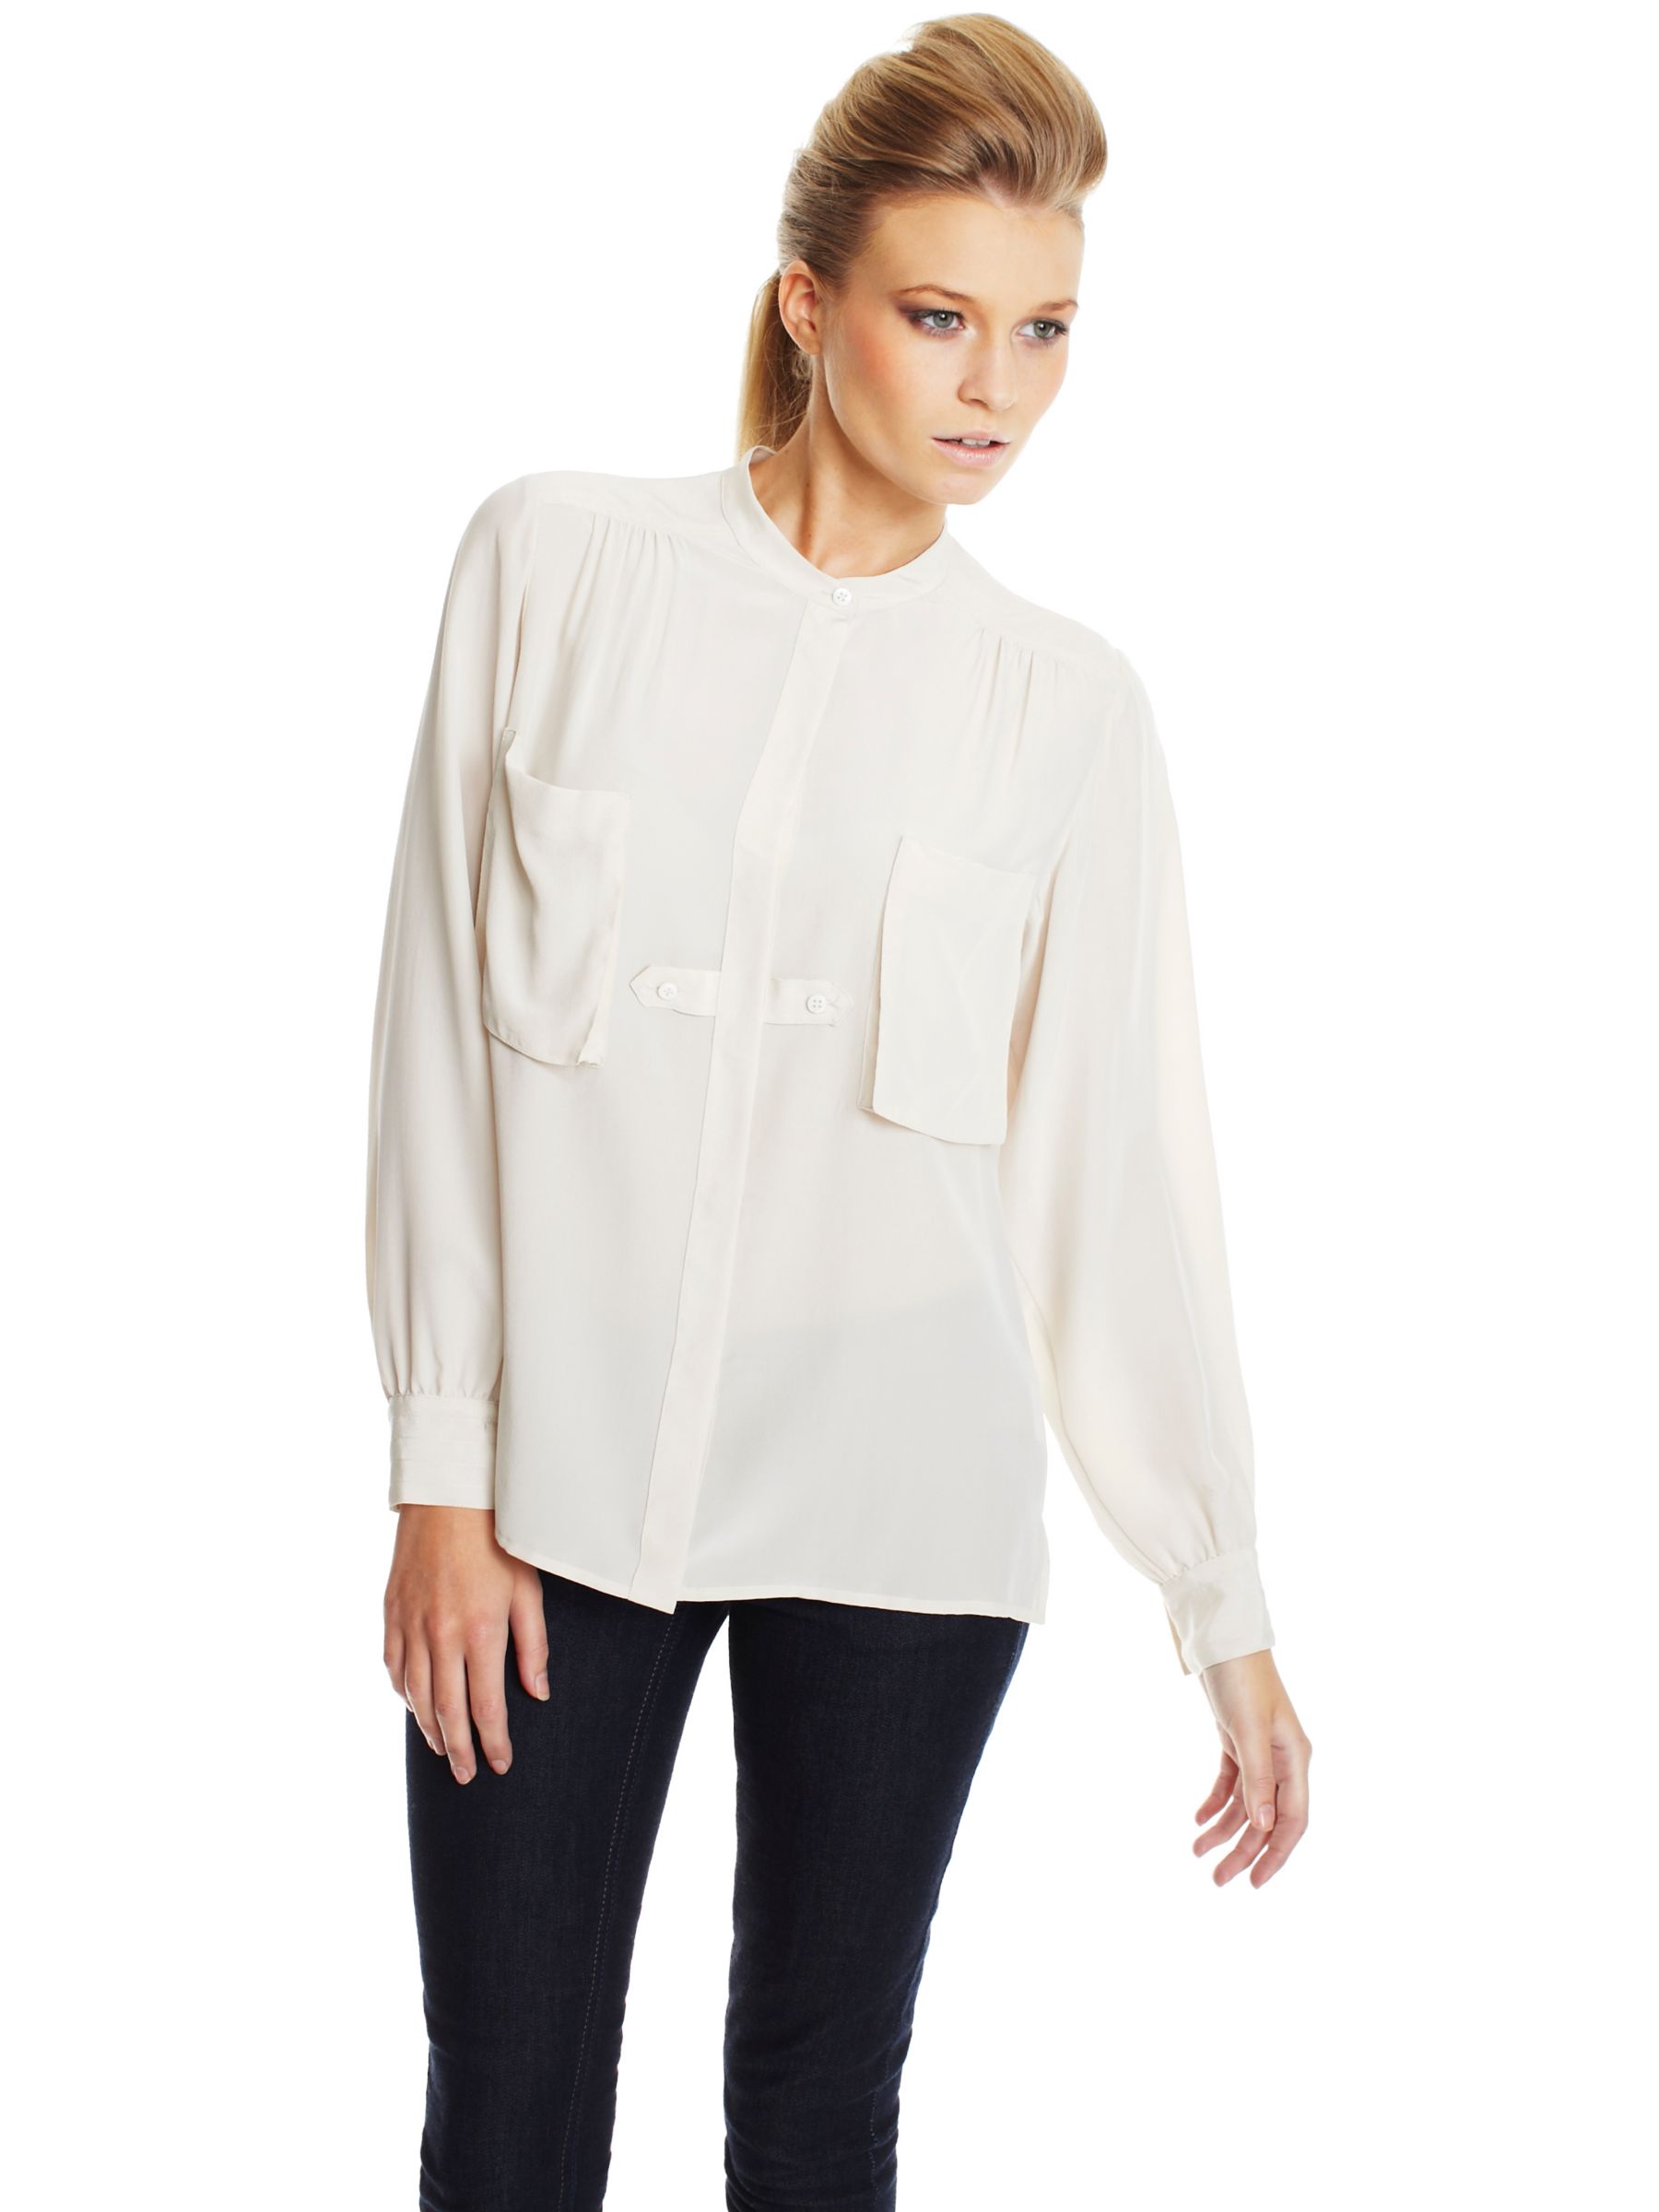 Whistles Amy Blouse, Ivory